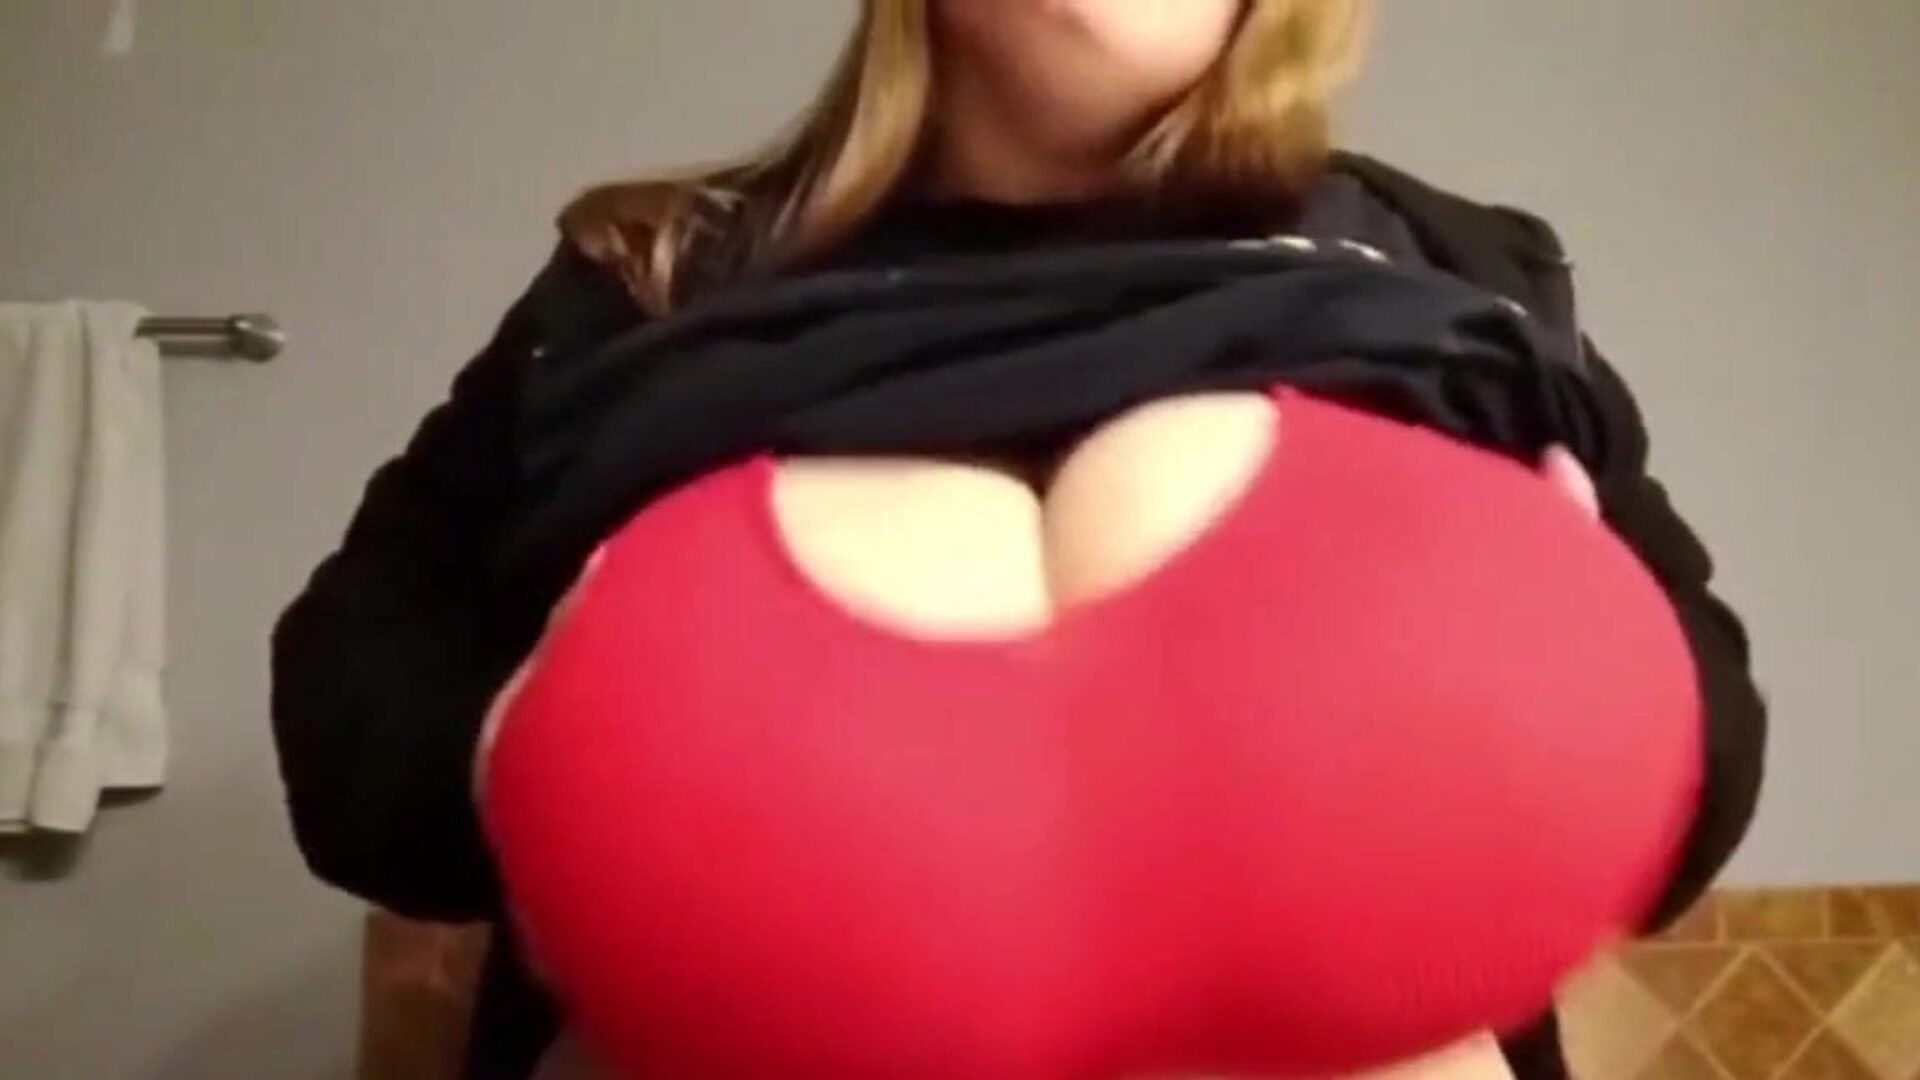 Gigantic Tits and Huge Areolas, Free Big Huge Boobs HD Porn Watch Gigantic Tits and Huge Areolas clip on xHamster, the superlatively good HD fucky-fucky tube website with tons of free-for-all Big Huge Boobs Homemade & big beautiful woman porno movies